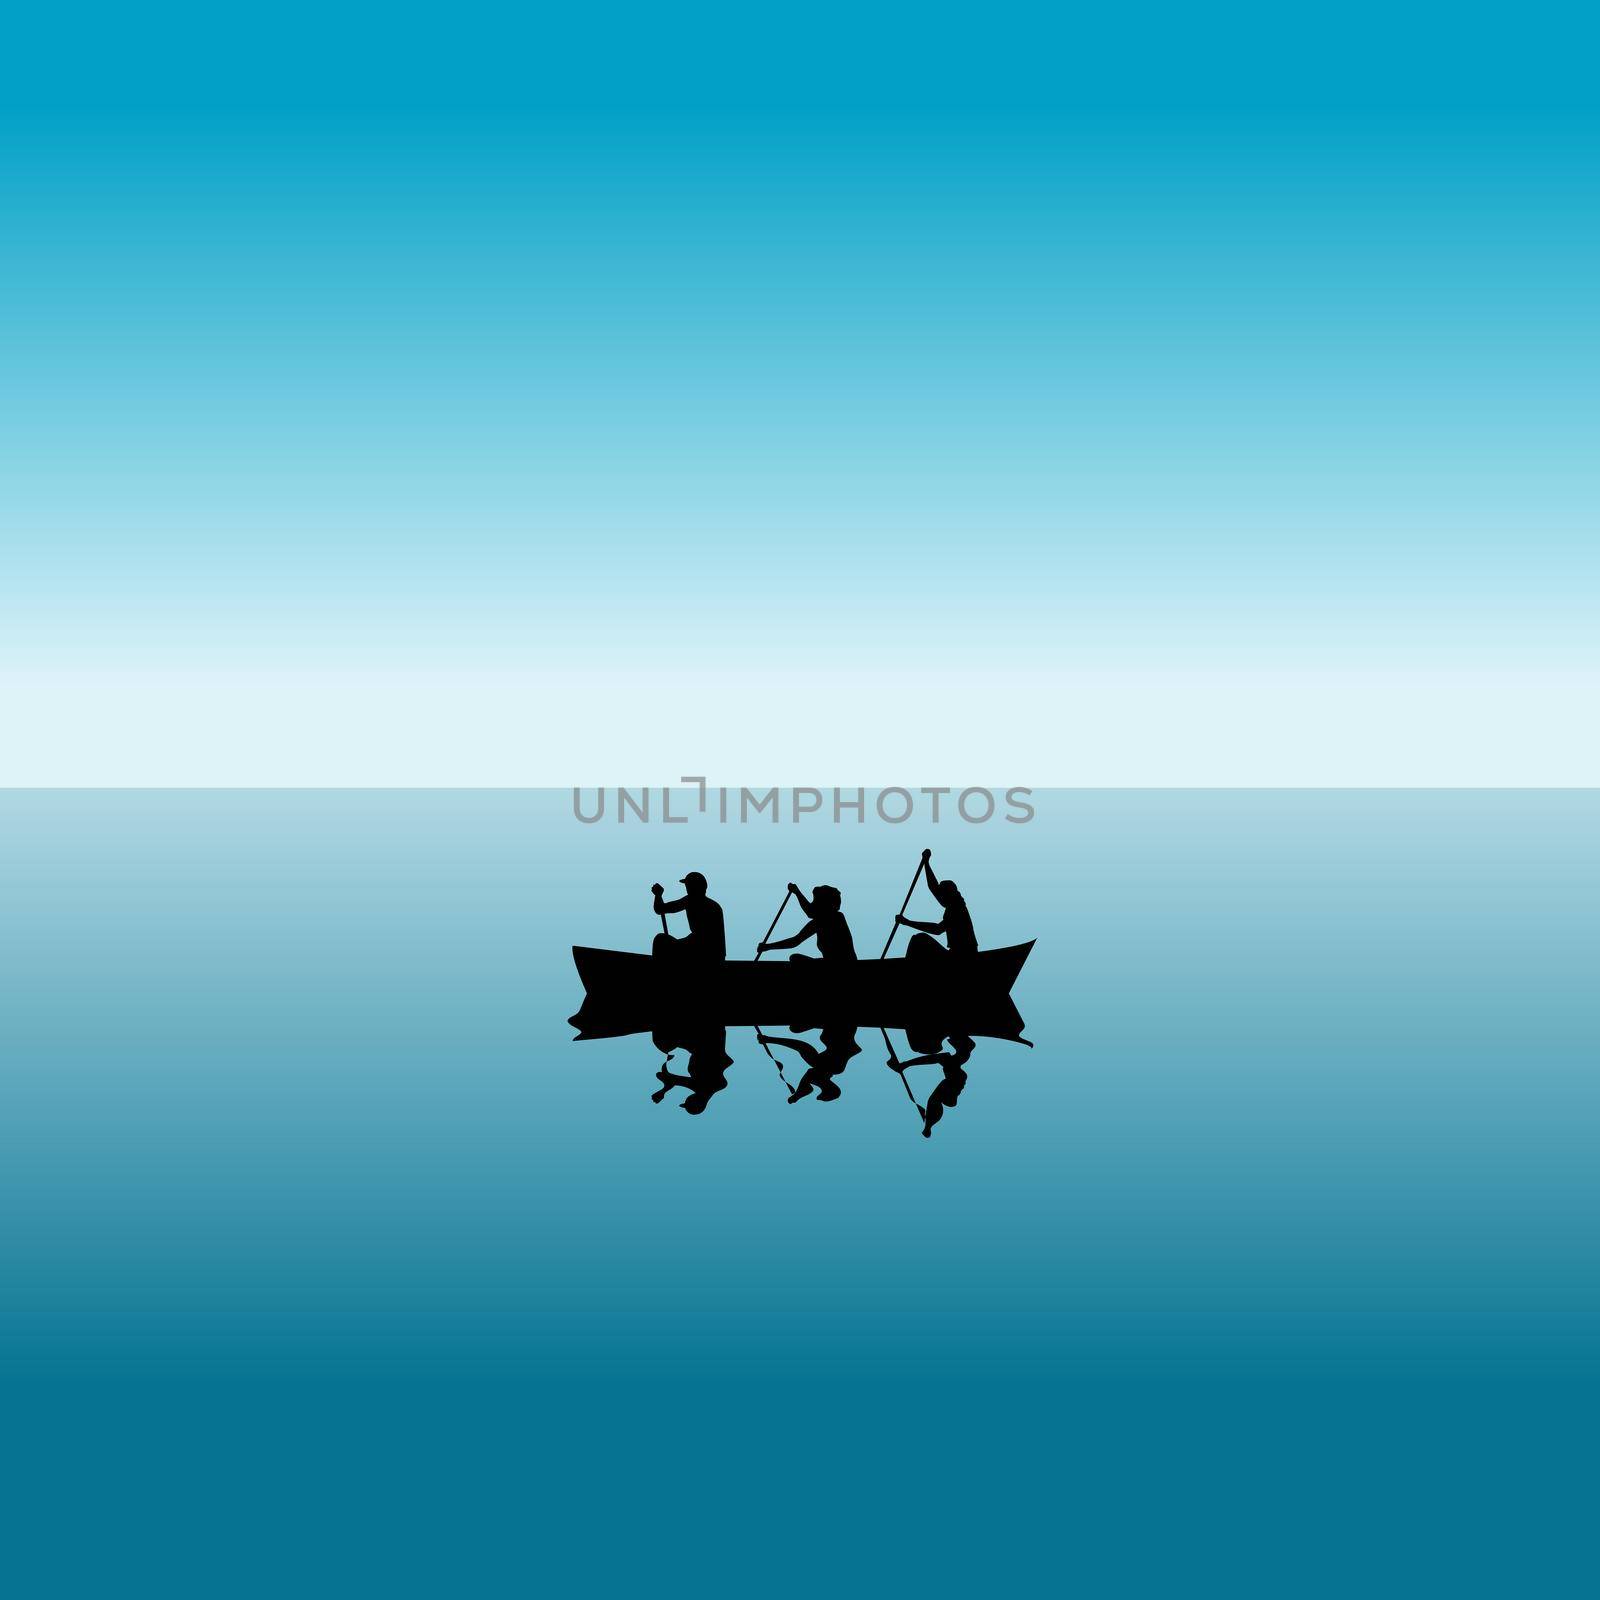 Three people in a boat silhouettes over blue water by hibrida13